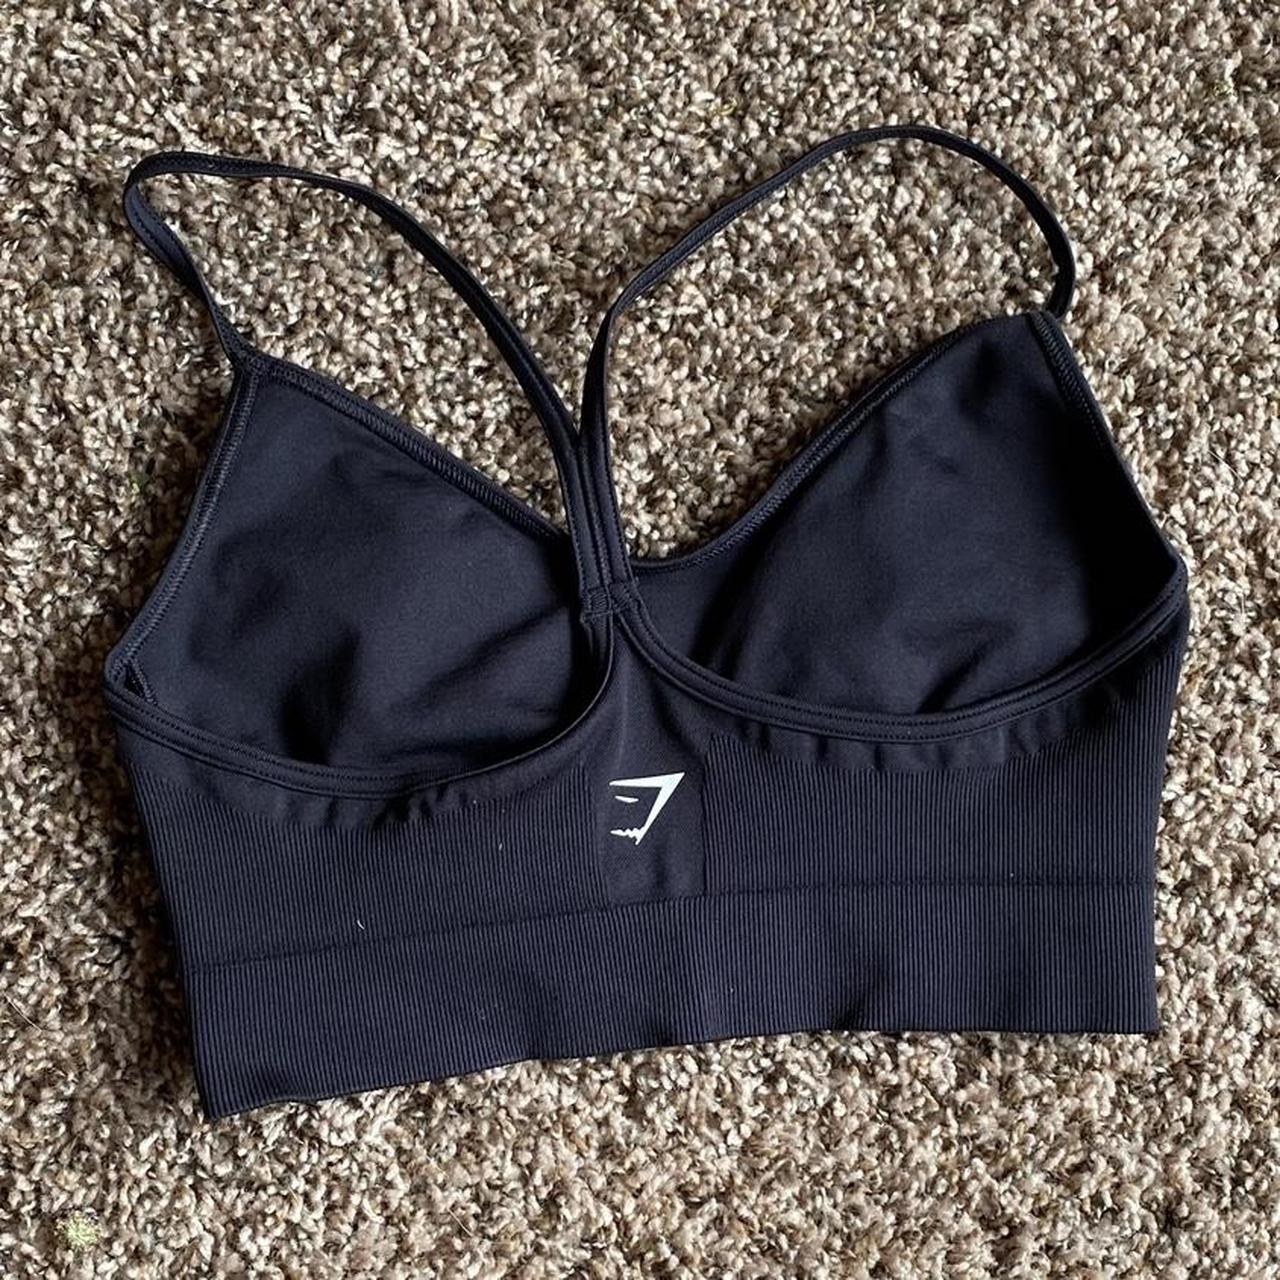 c9 champion sports bra. padding and tag are missing. - Depop